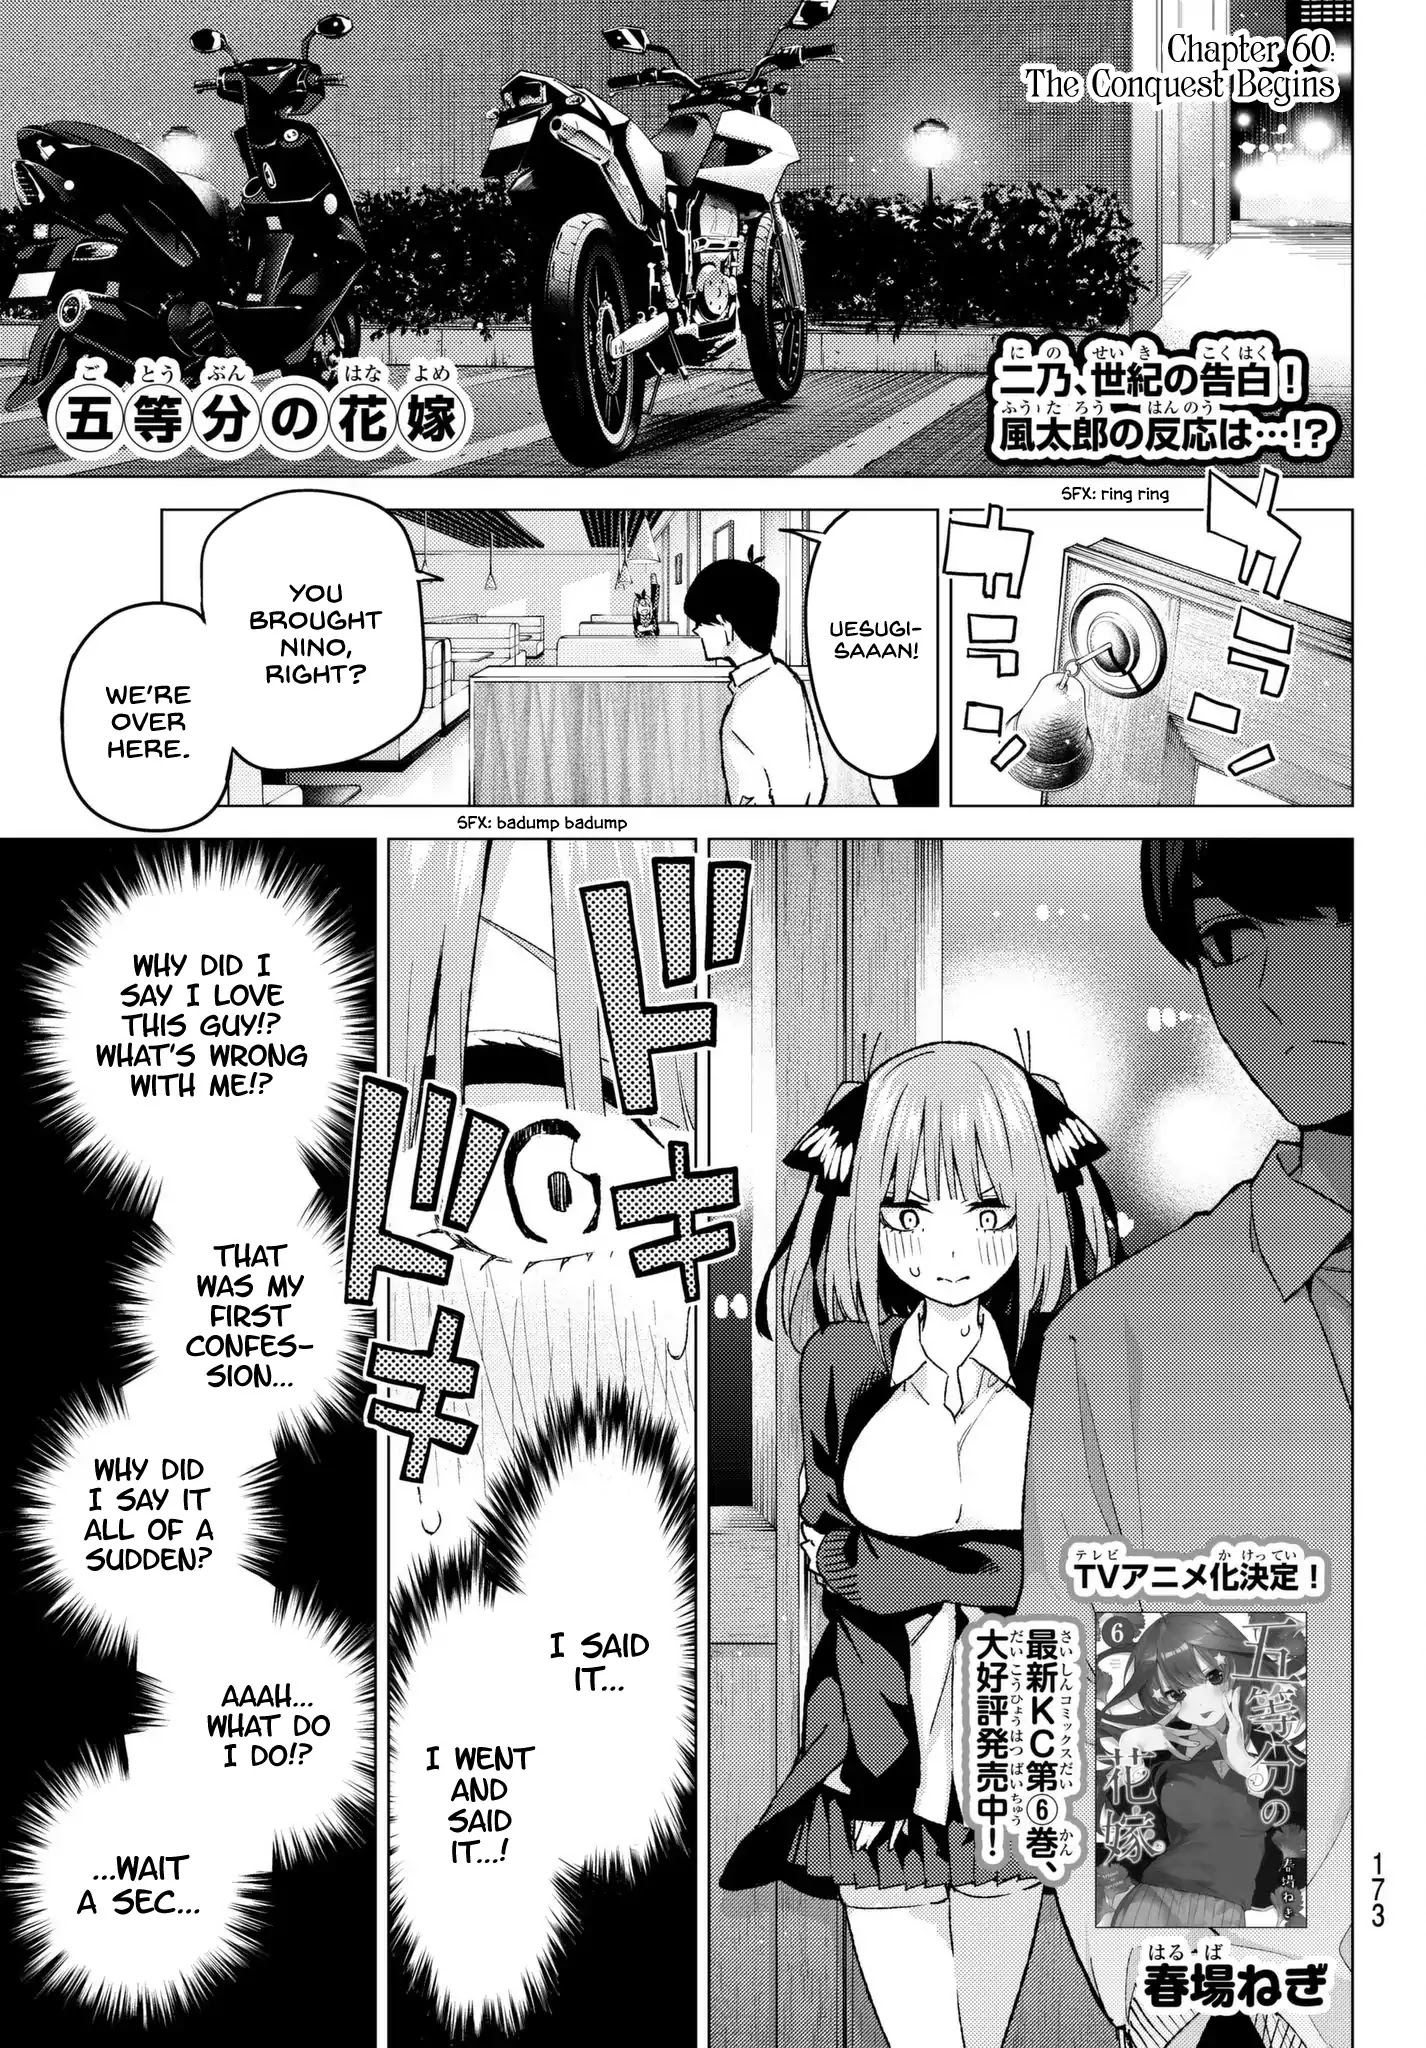 Go-Toubun No Hanayome Chapter 60: The Conquest Begins - Picture 1